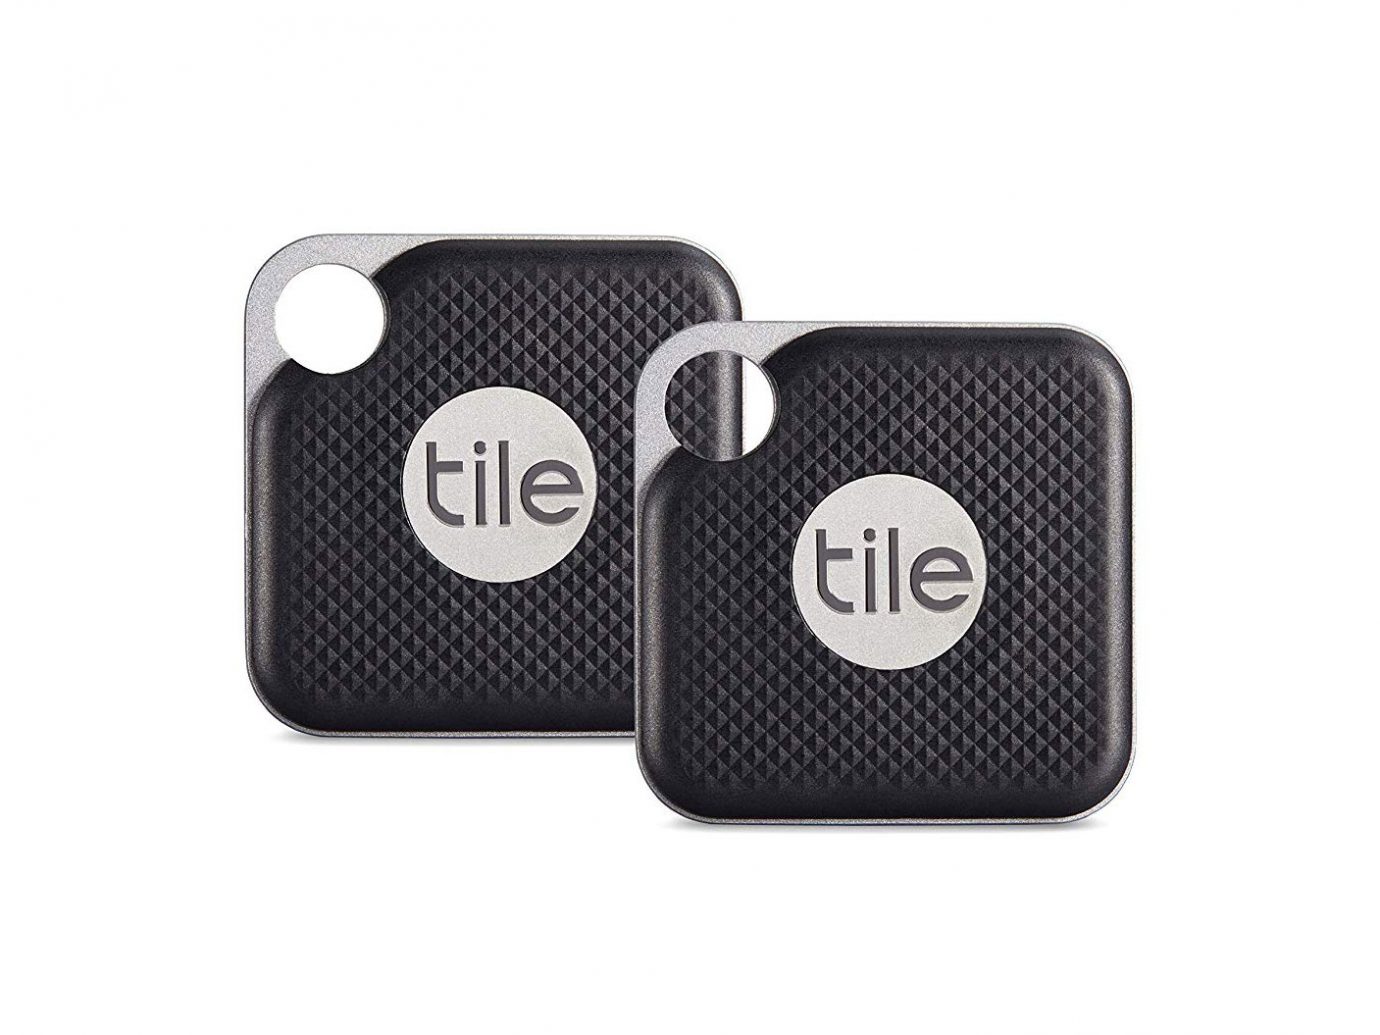 Tile Pro with Replaceable Battery